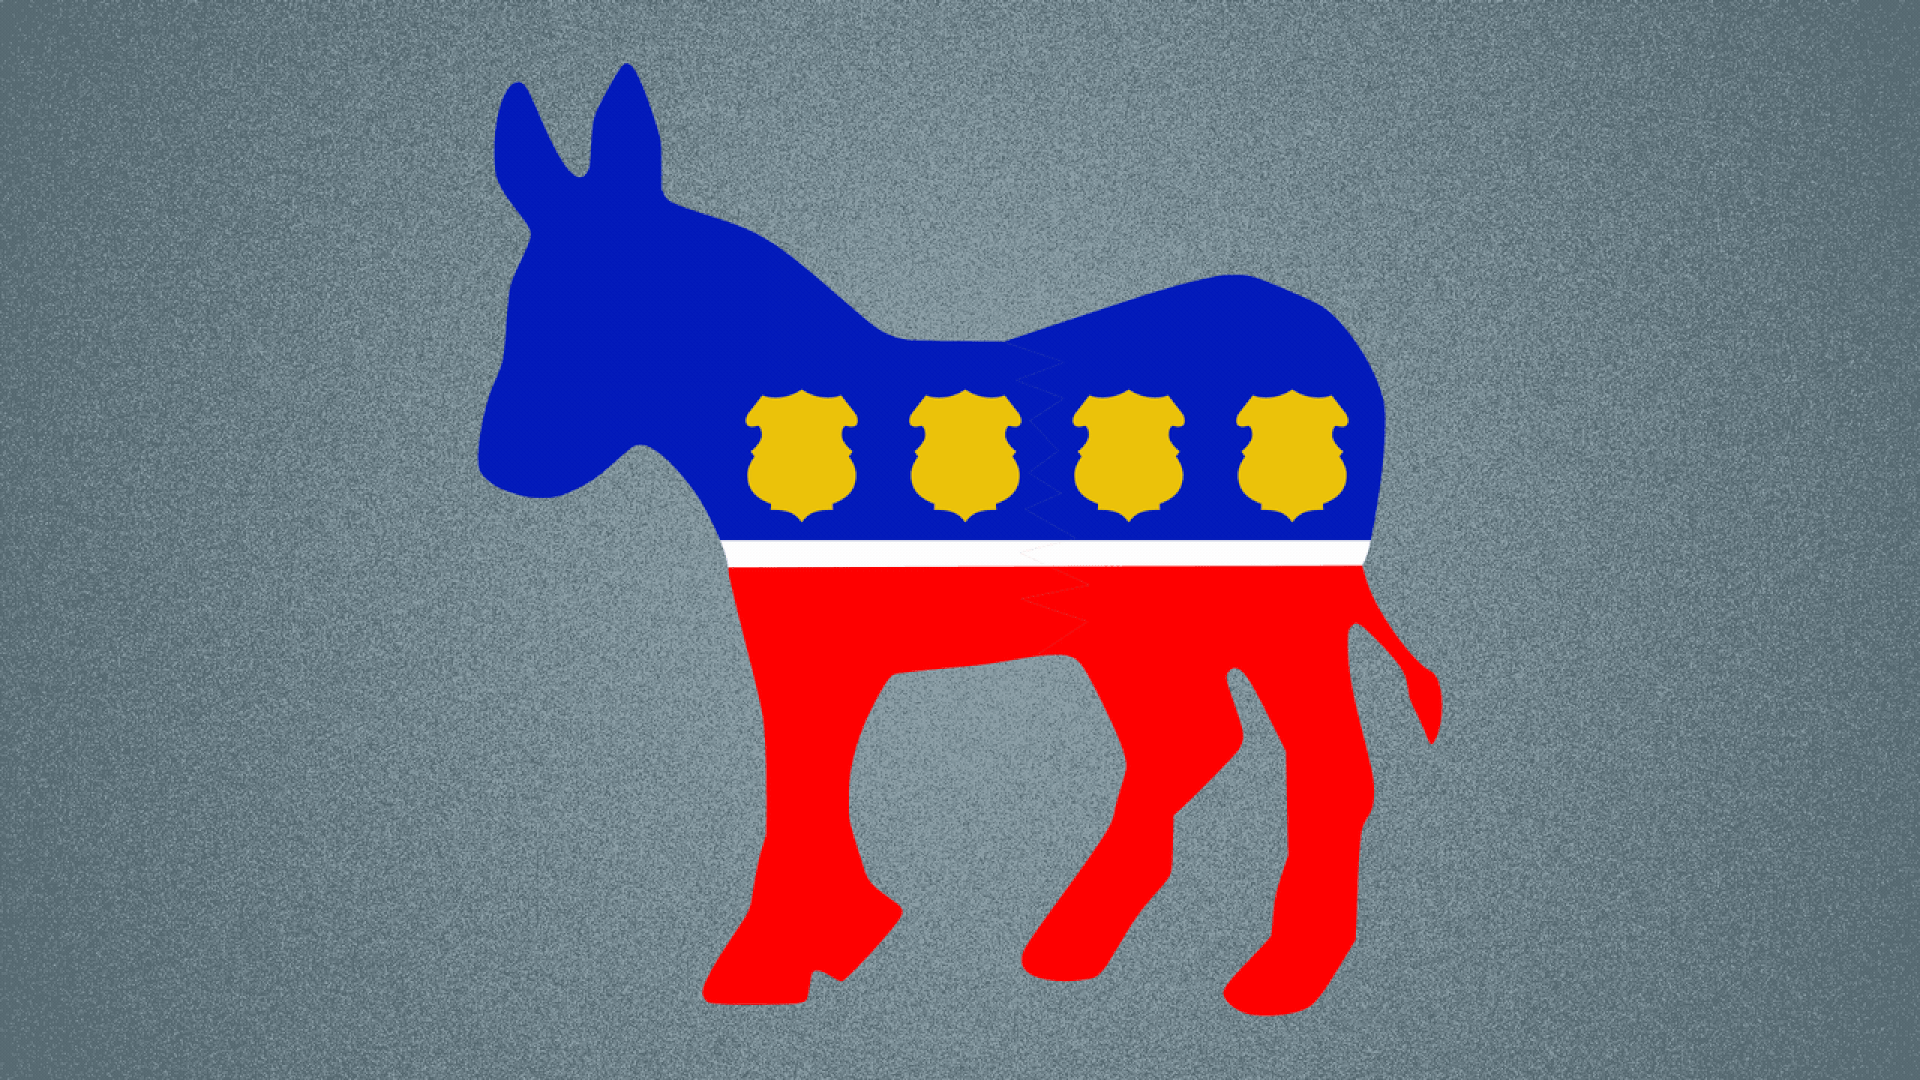 Illustration of the Democratic donkey logo, with police badges instead of stars, splitting in half.